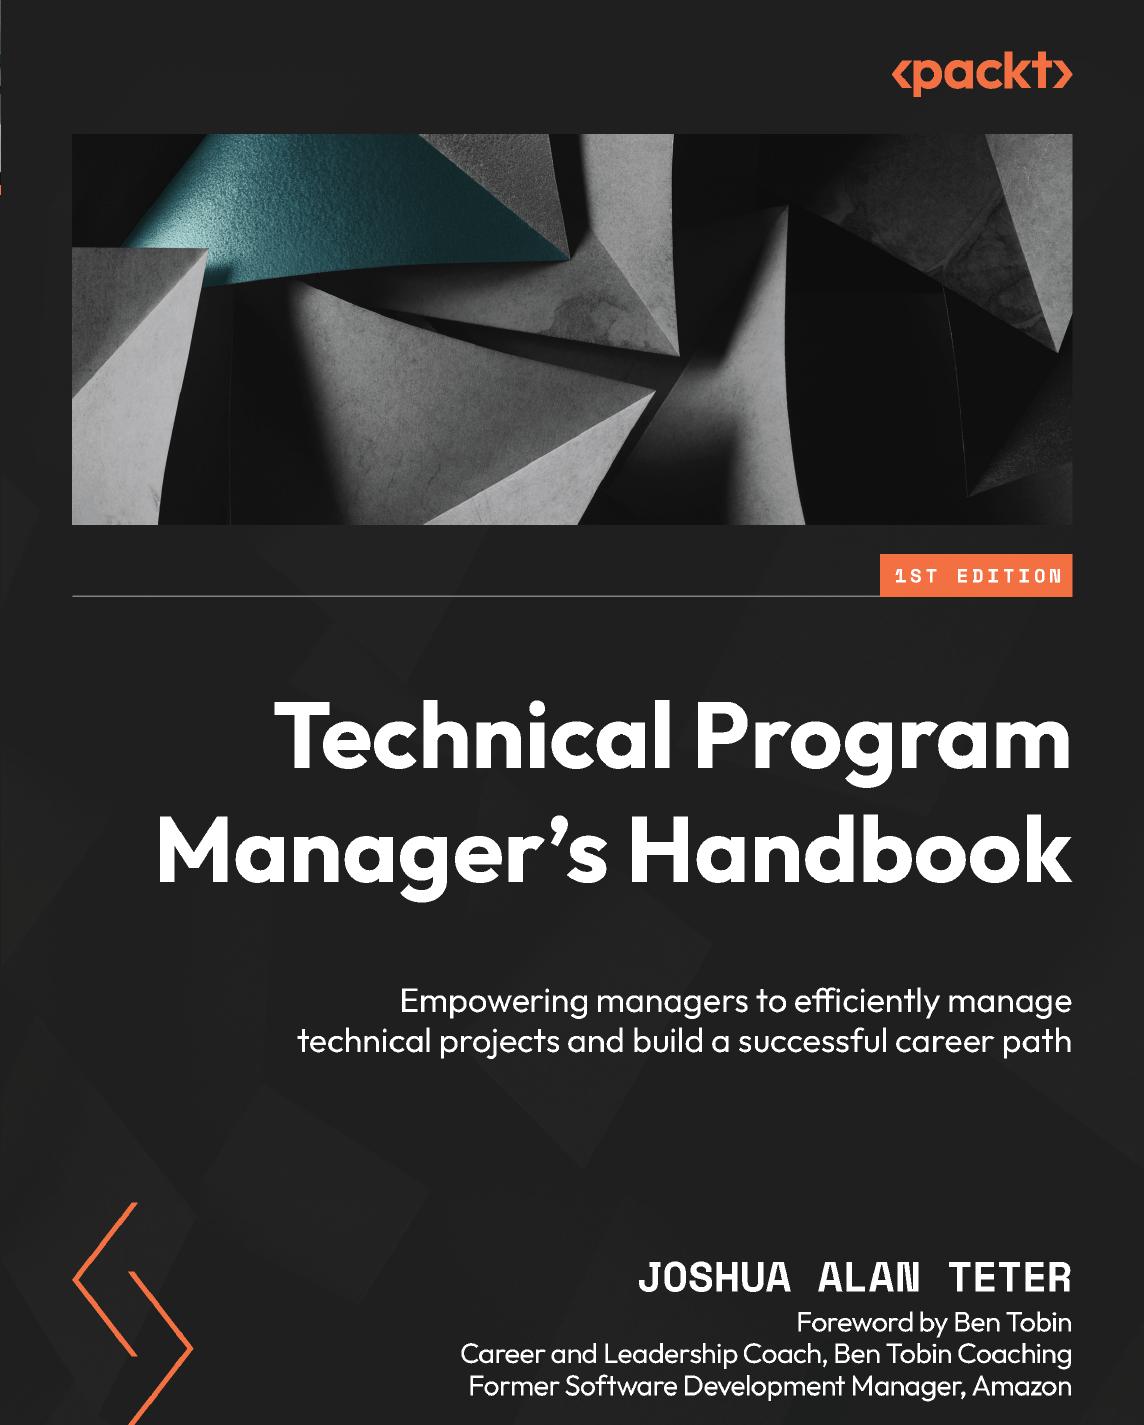 Technical Program Manager's Handbook: Empowering managers to efficiently manage technical projects and build a successful career path by Joshua Alan Teter